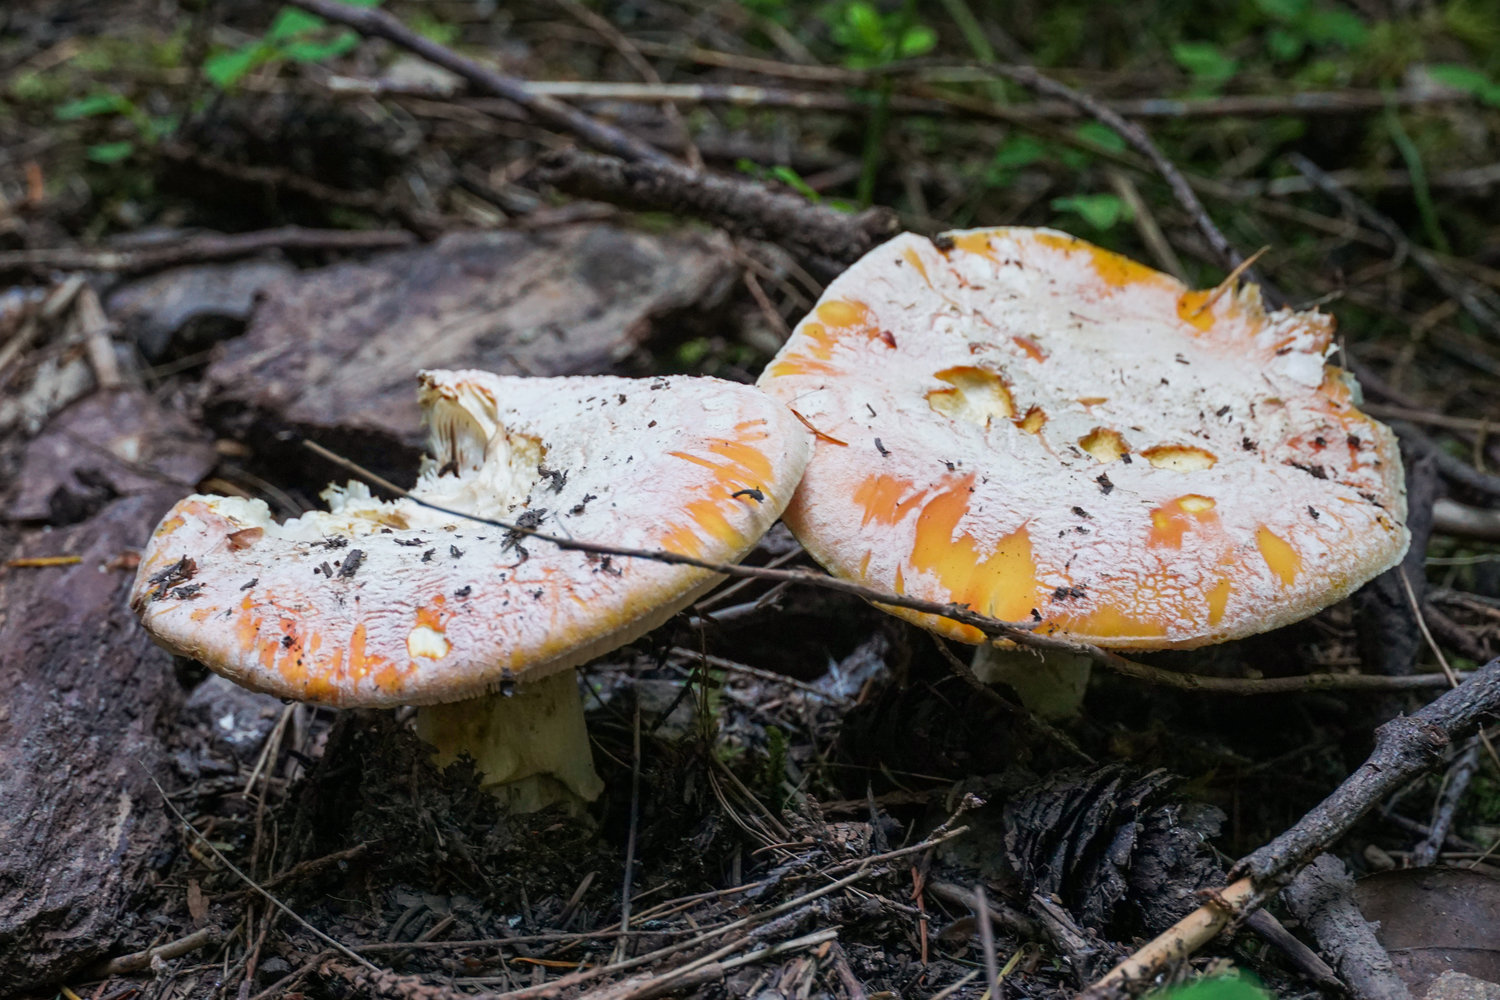 Mushrooms grow on the forest floor in the Goat Rocks Wilderness just off the Packwood Lake trail, pictured Wednesday afternoon.